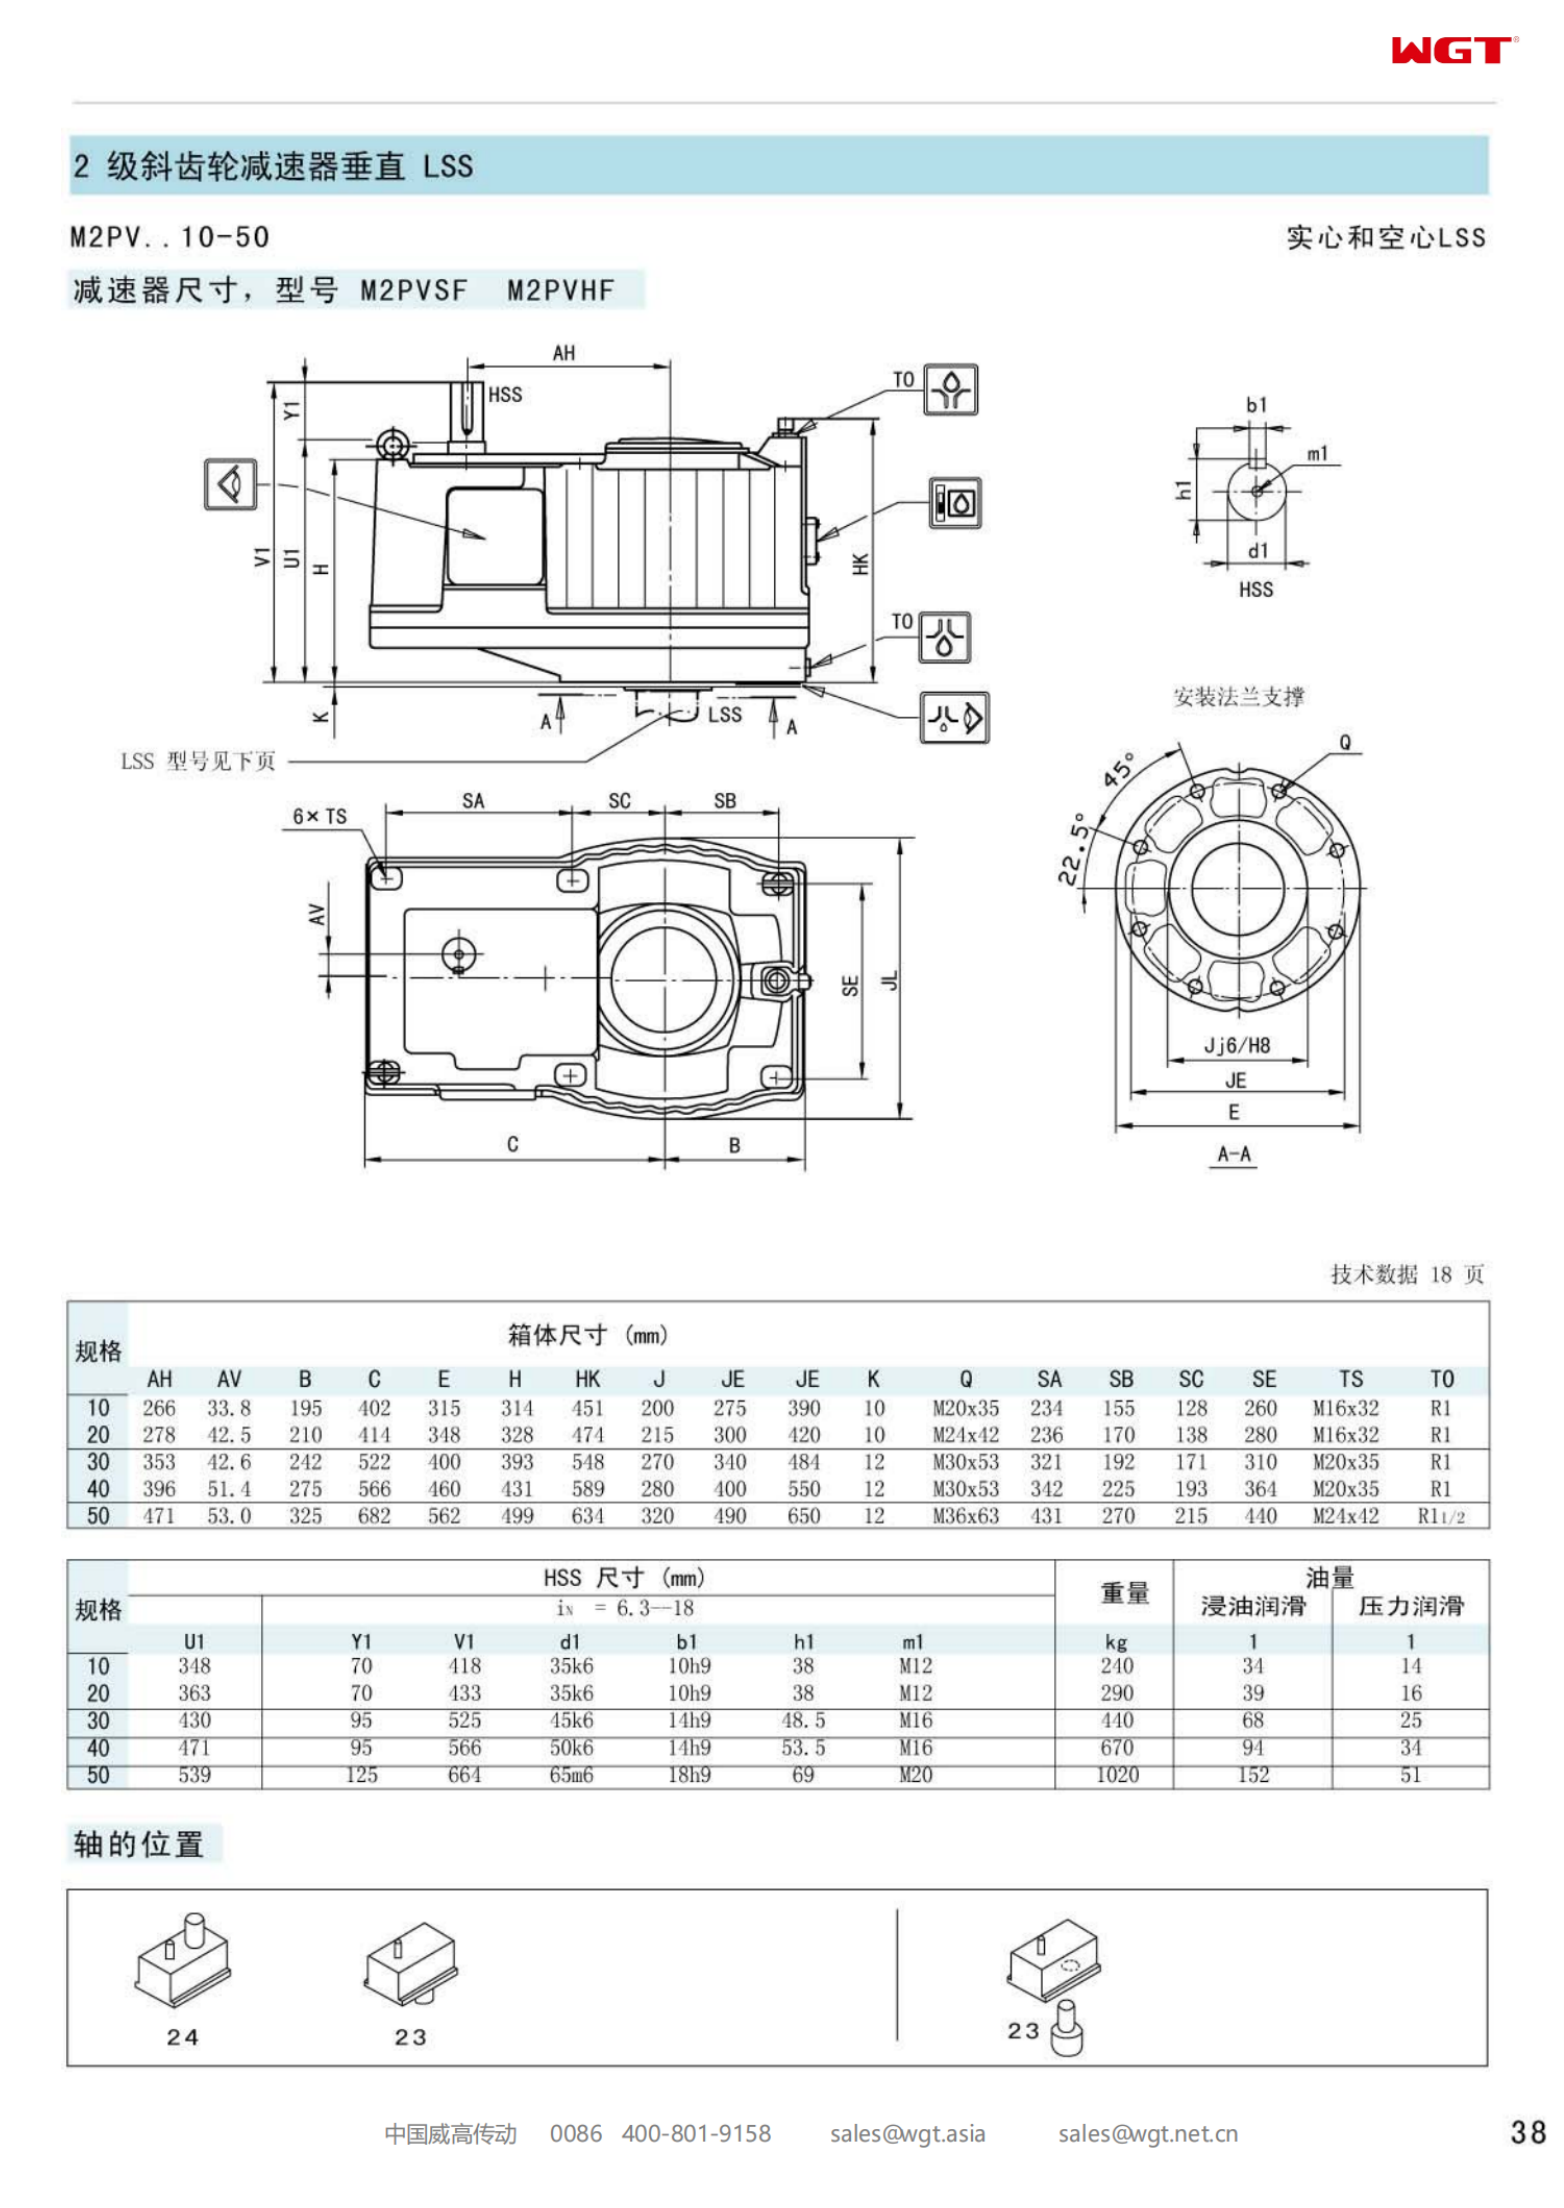 M2PVHF40 Replace_SEW_M_Series Gearbox